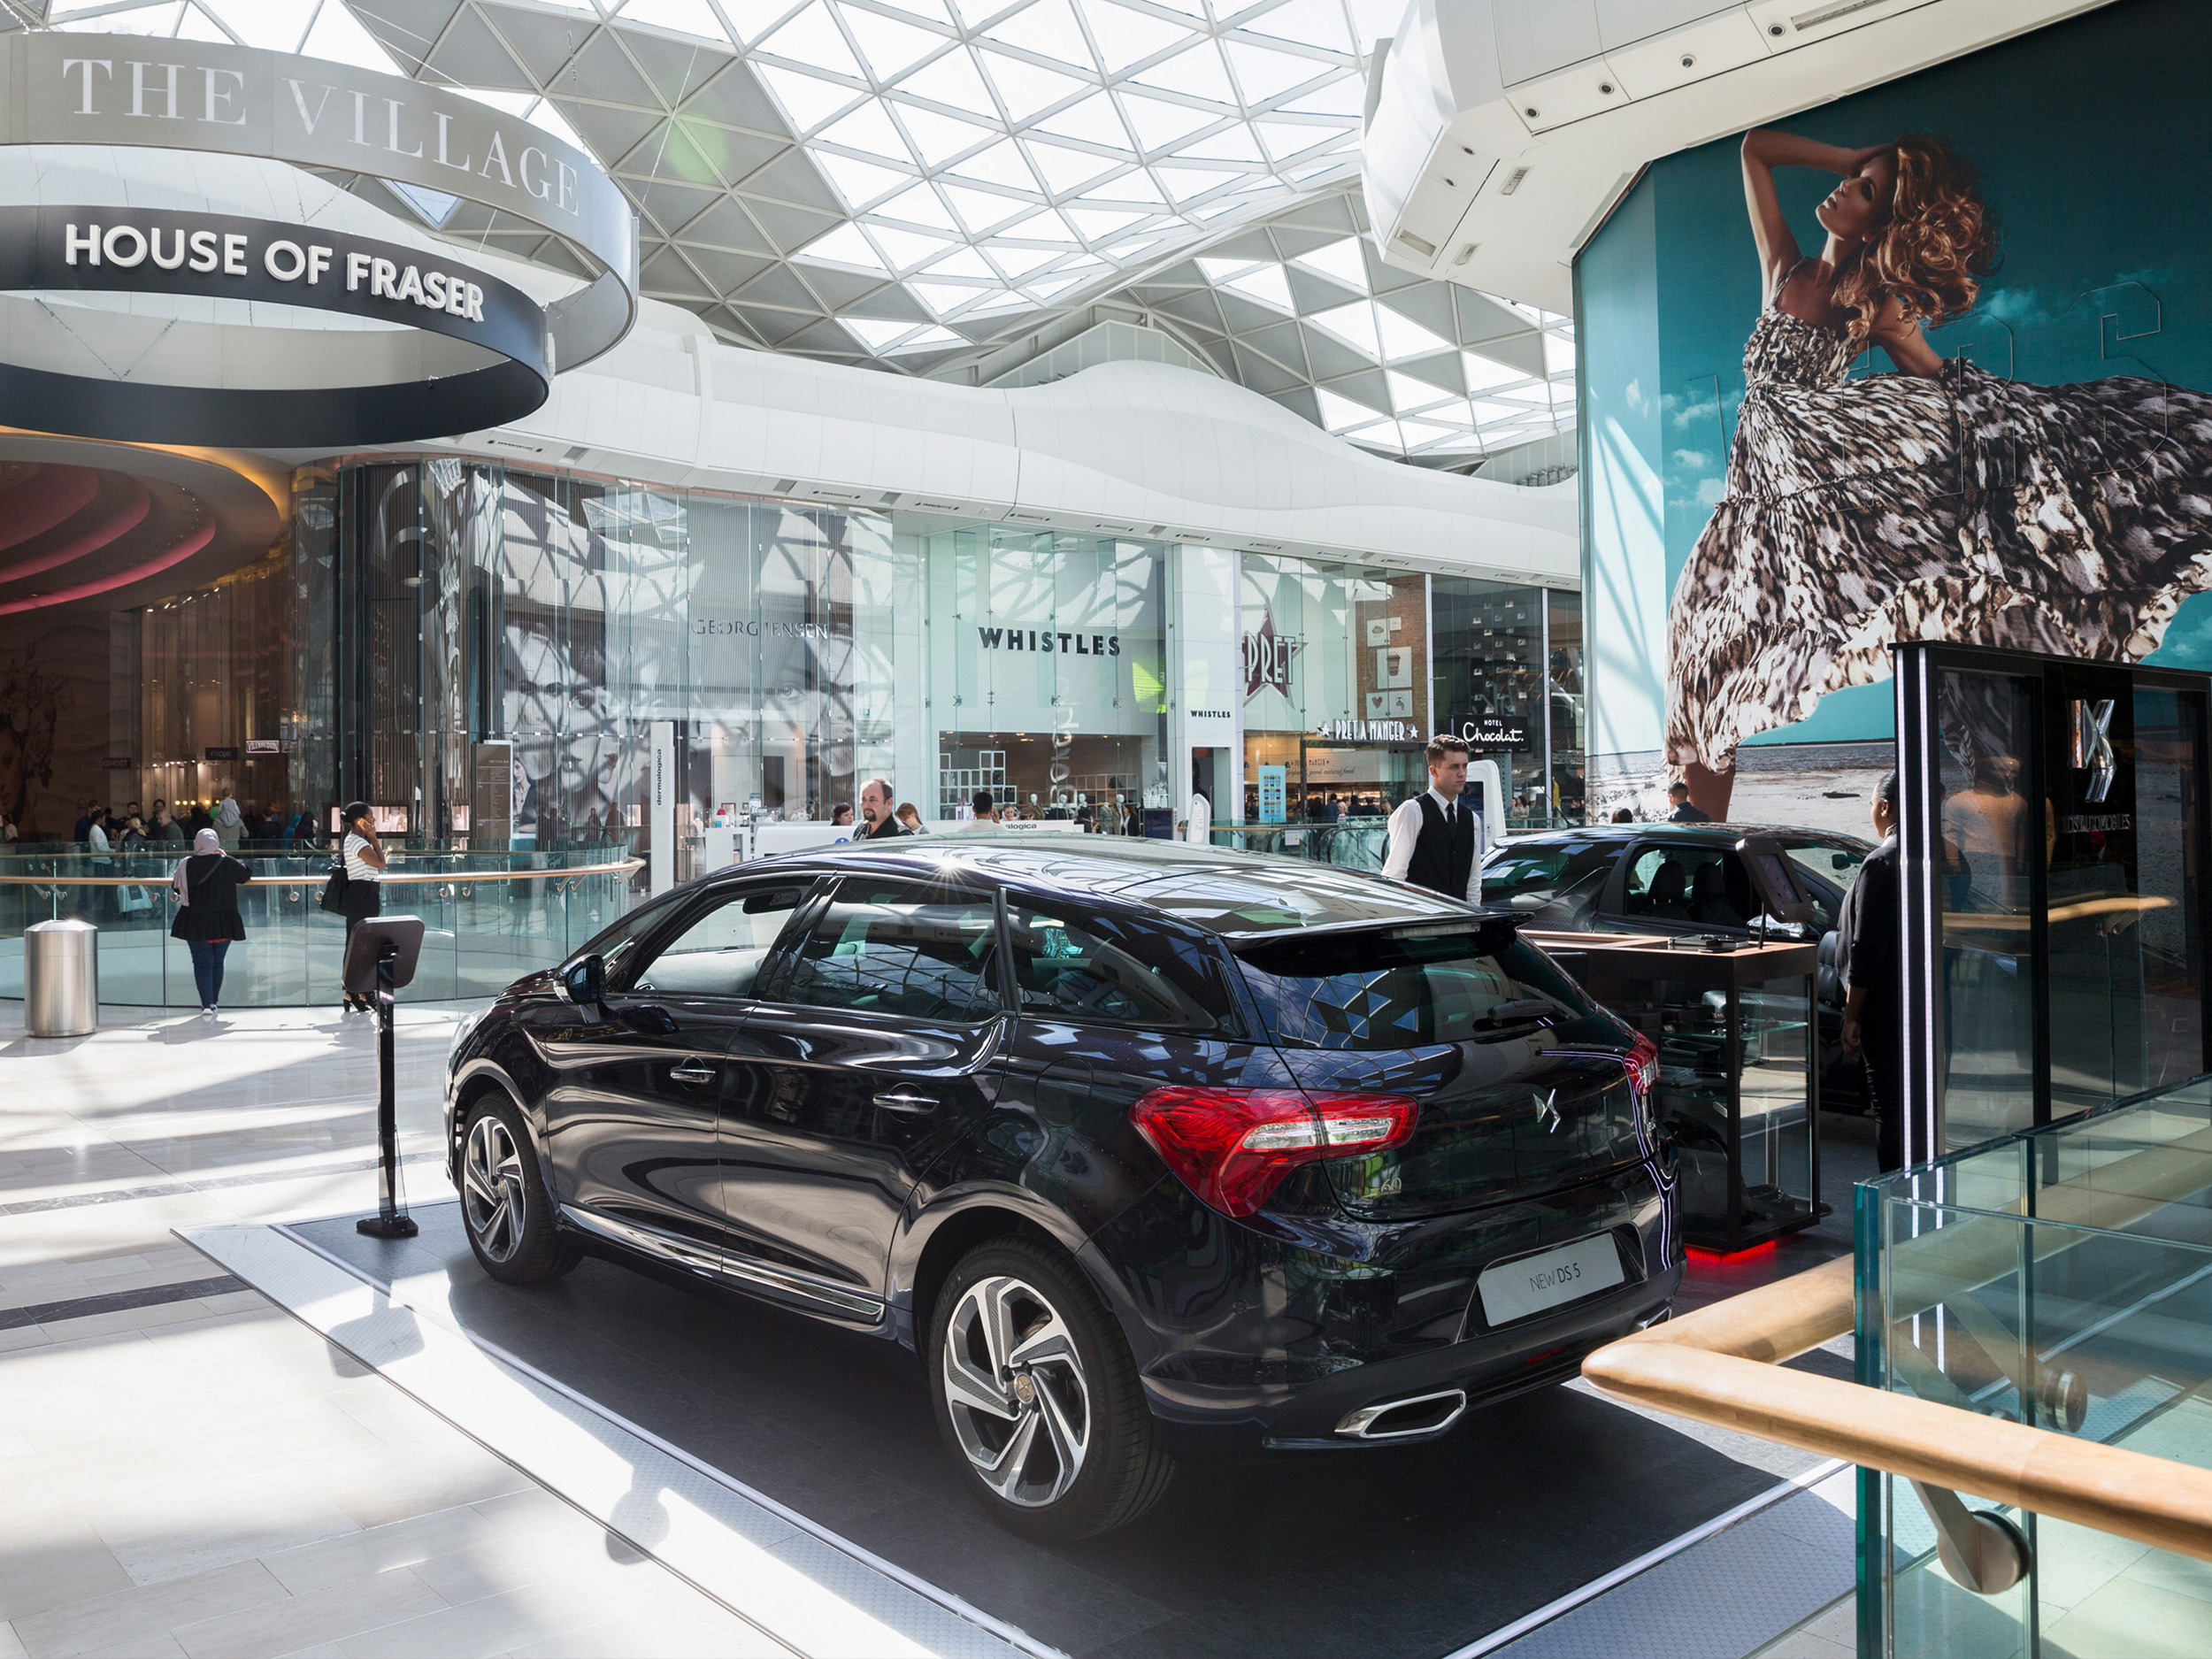 DS Automobiles targets Westfield's luxury label shoppers